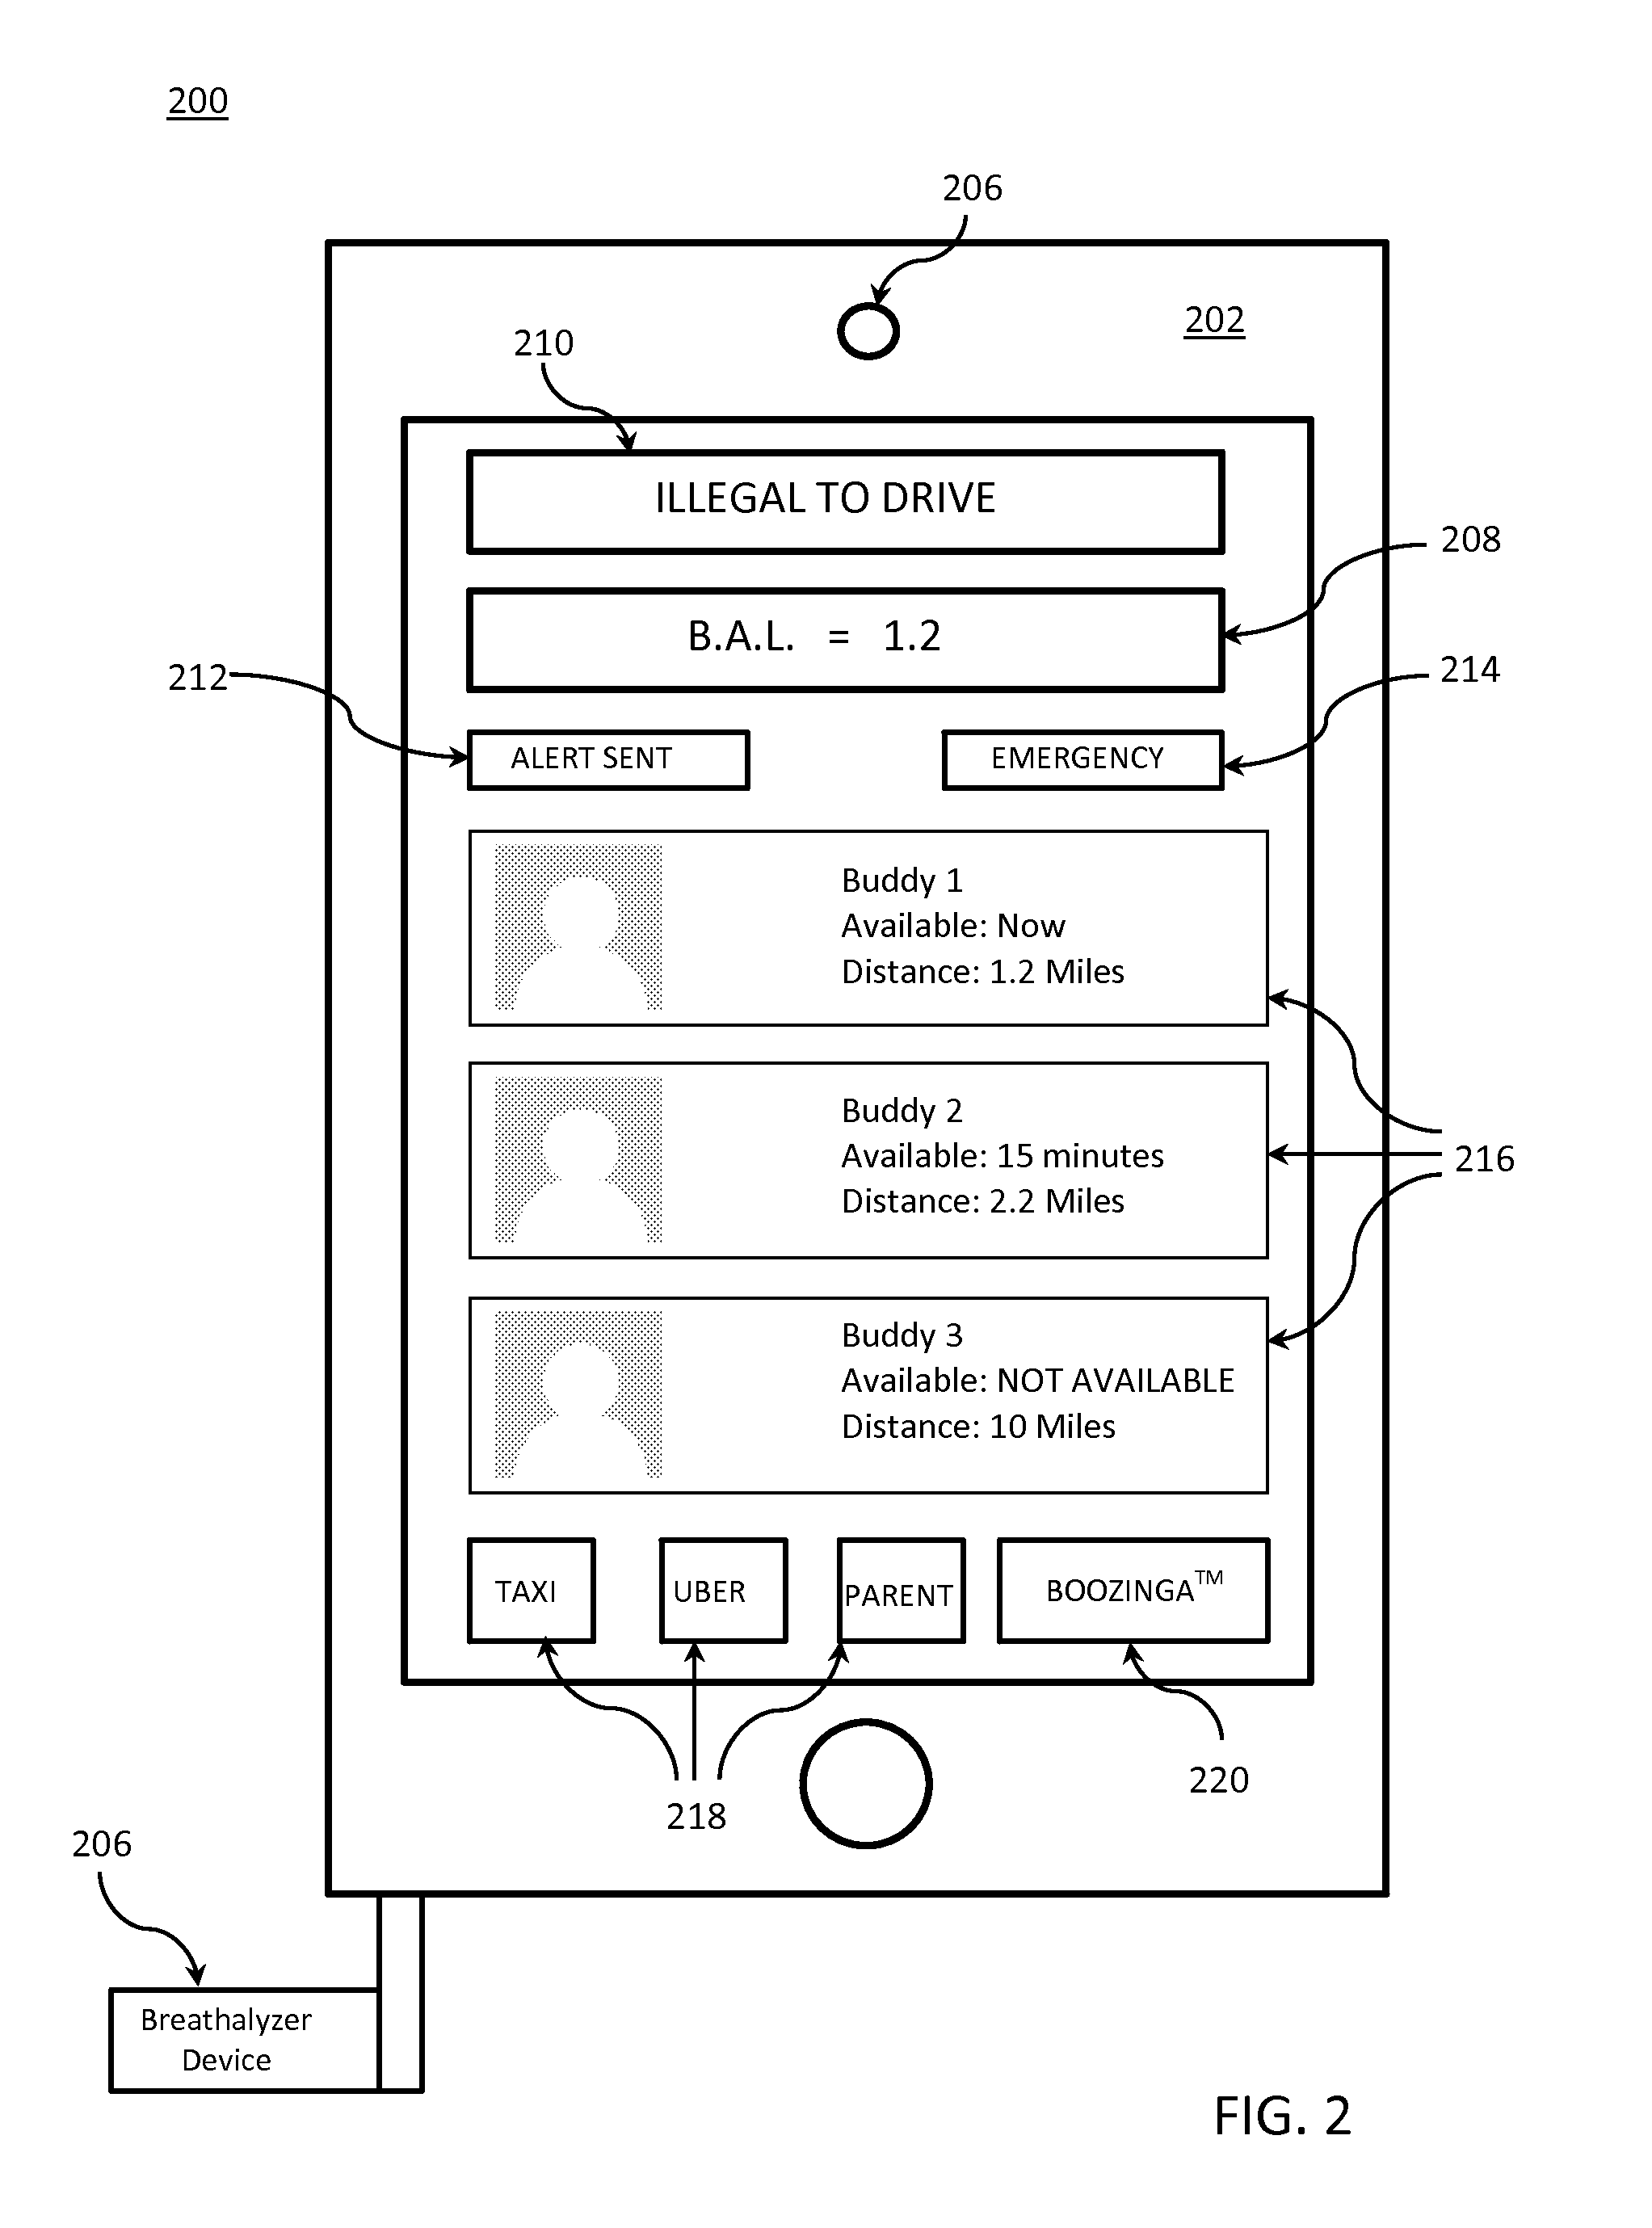 System and method for testing blood alcohol level and transmitting the results using a mobile device